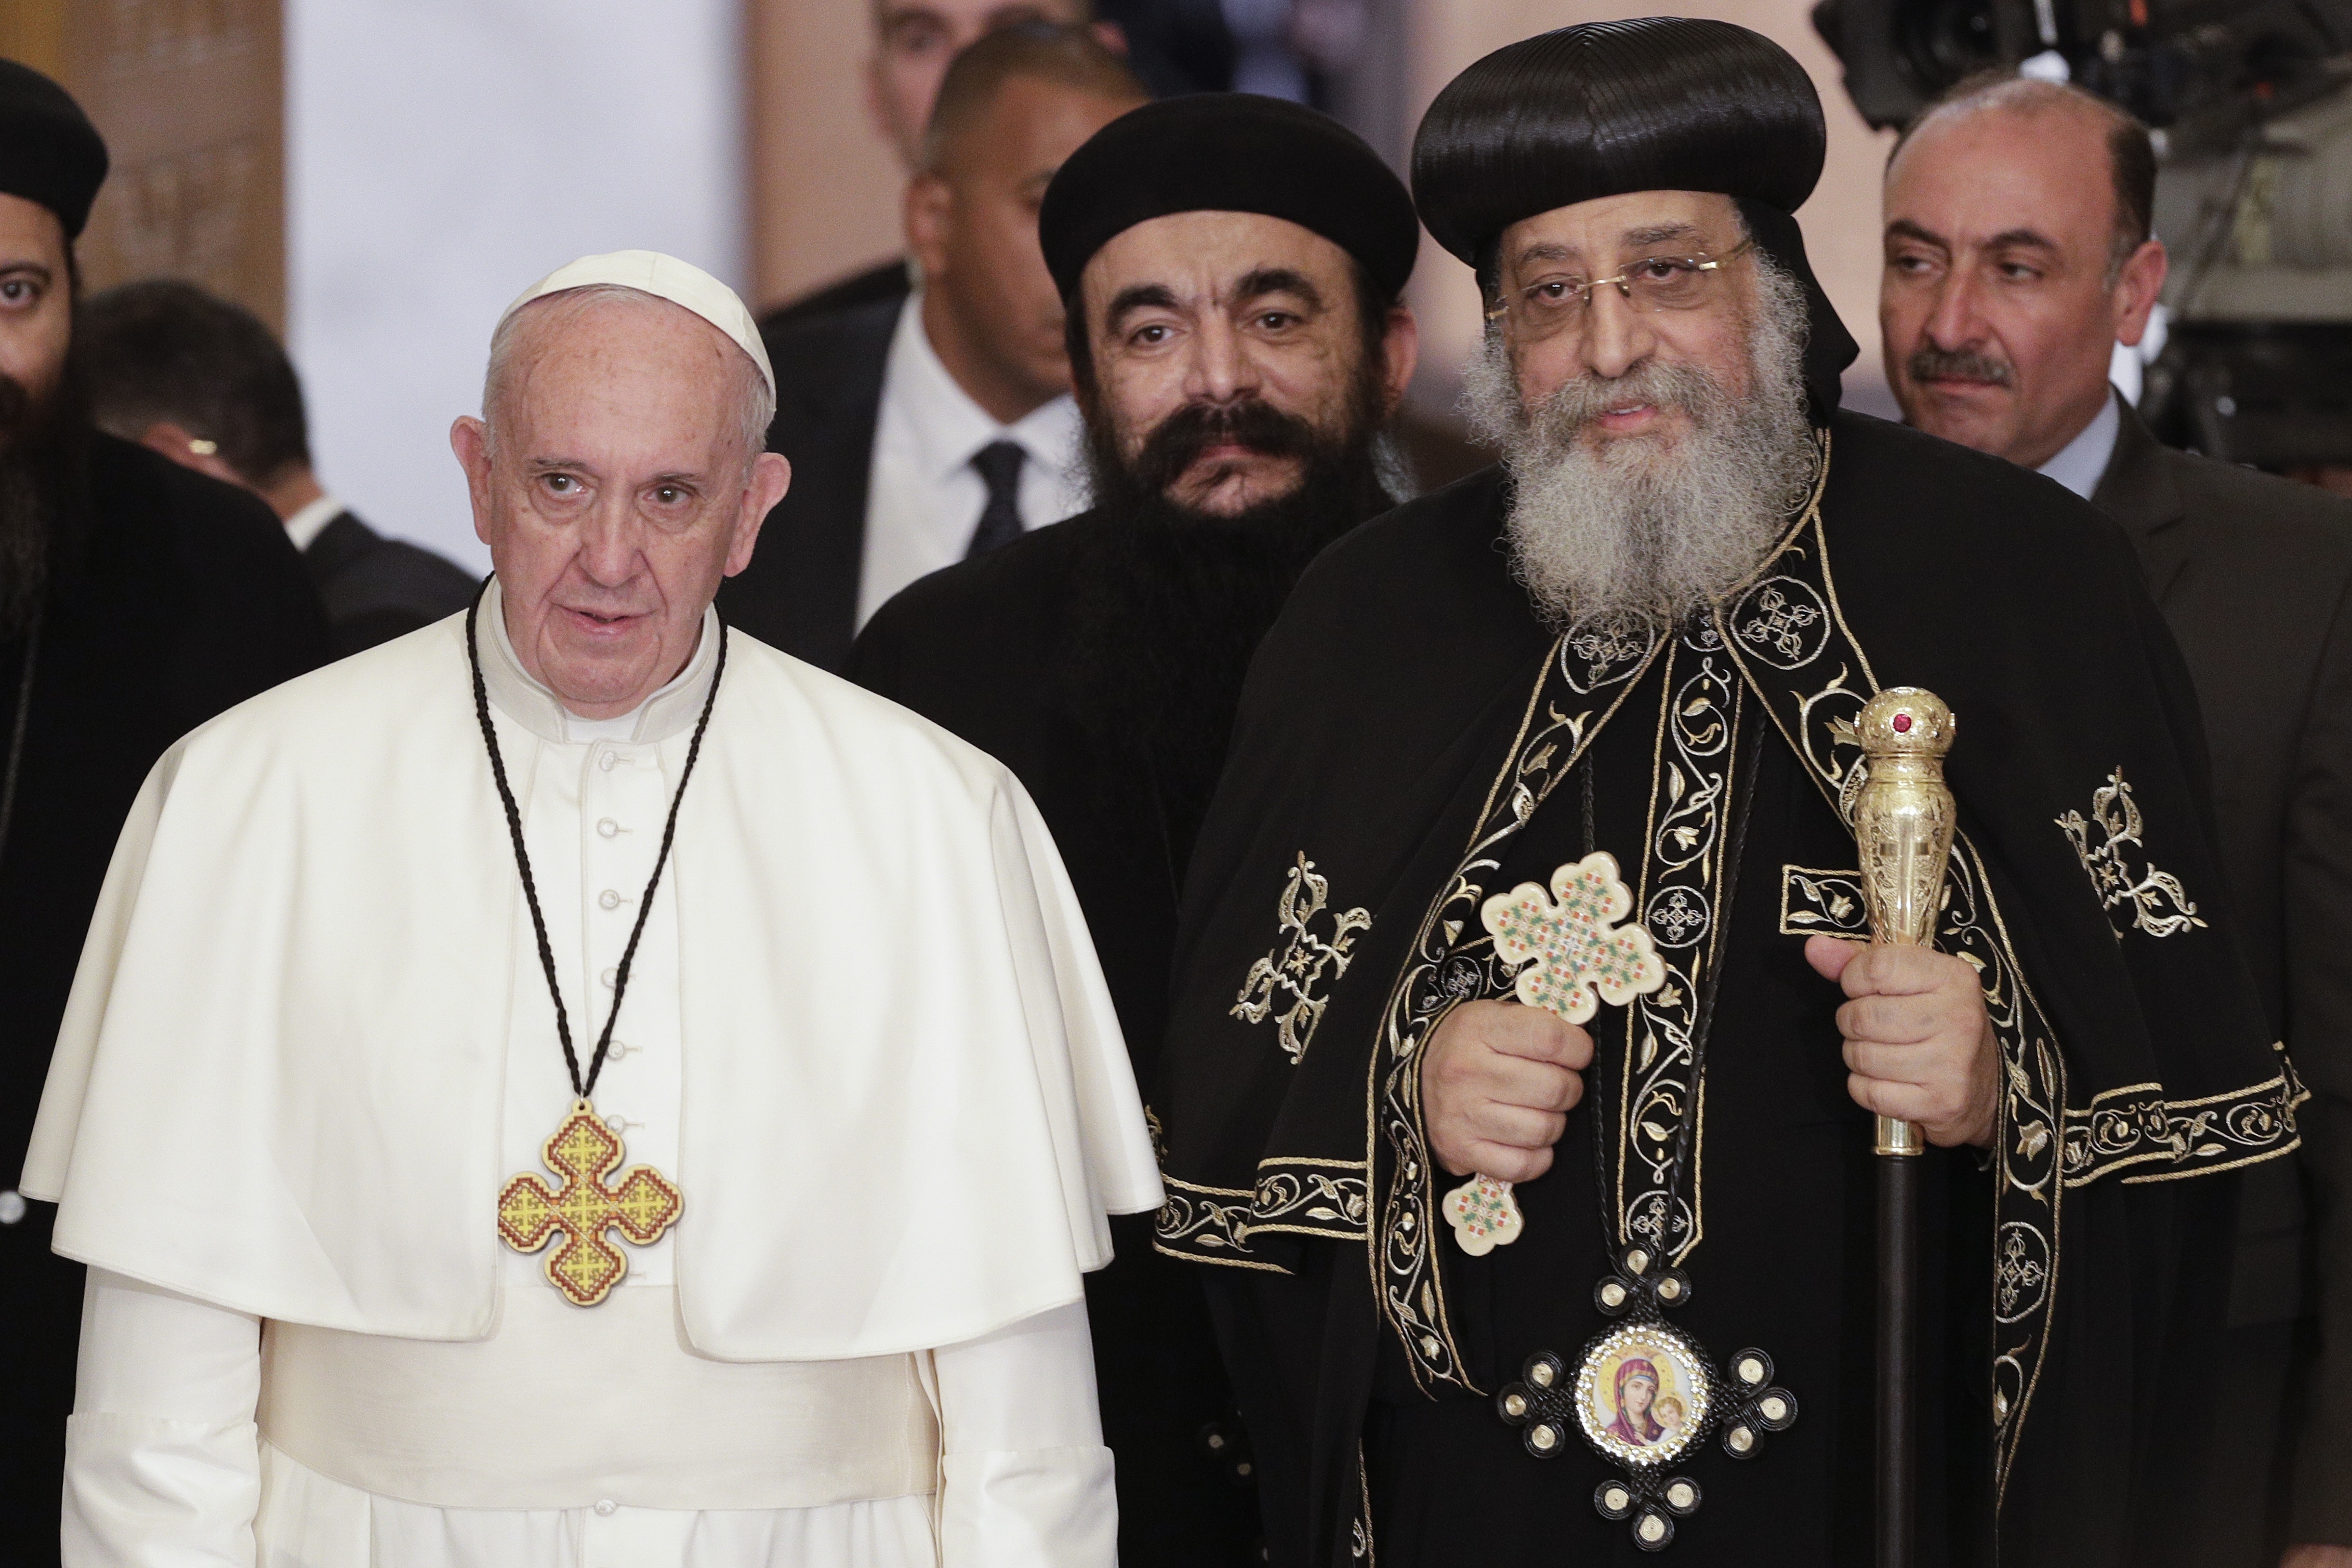 Pope Francis, left, is flanked by Pope Tawadros II, spiritual leader of Egypt's Orthodox Christians, 2nd from right, at Cairo's St. Mark's Cathedral, Friday, April 28, 2017. Francis is in Egypt for a two-day trip aimed at presenting a united Christian-Muslim front that repudiates violence committed in God's name. (AP Photo/Gregorio Borgia)